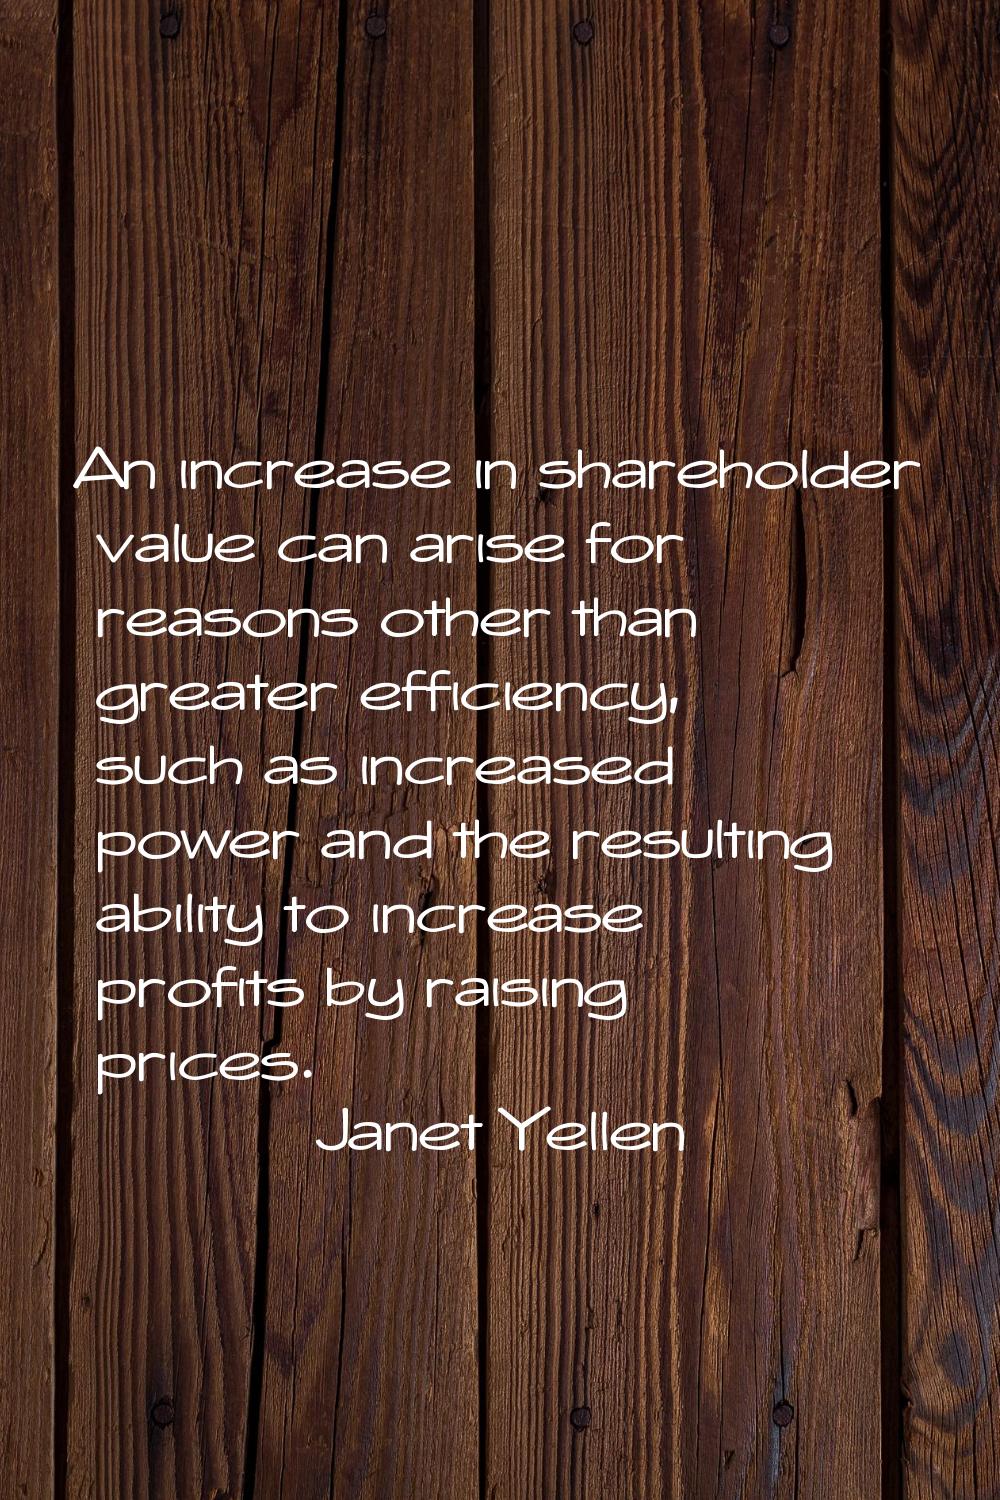 An increase in shareholder value can arise for reasons other than greater efficiency, such as incre